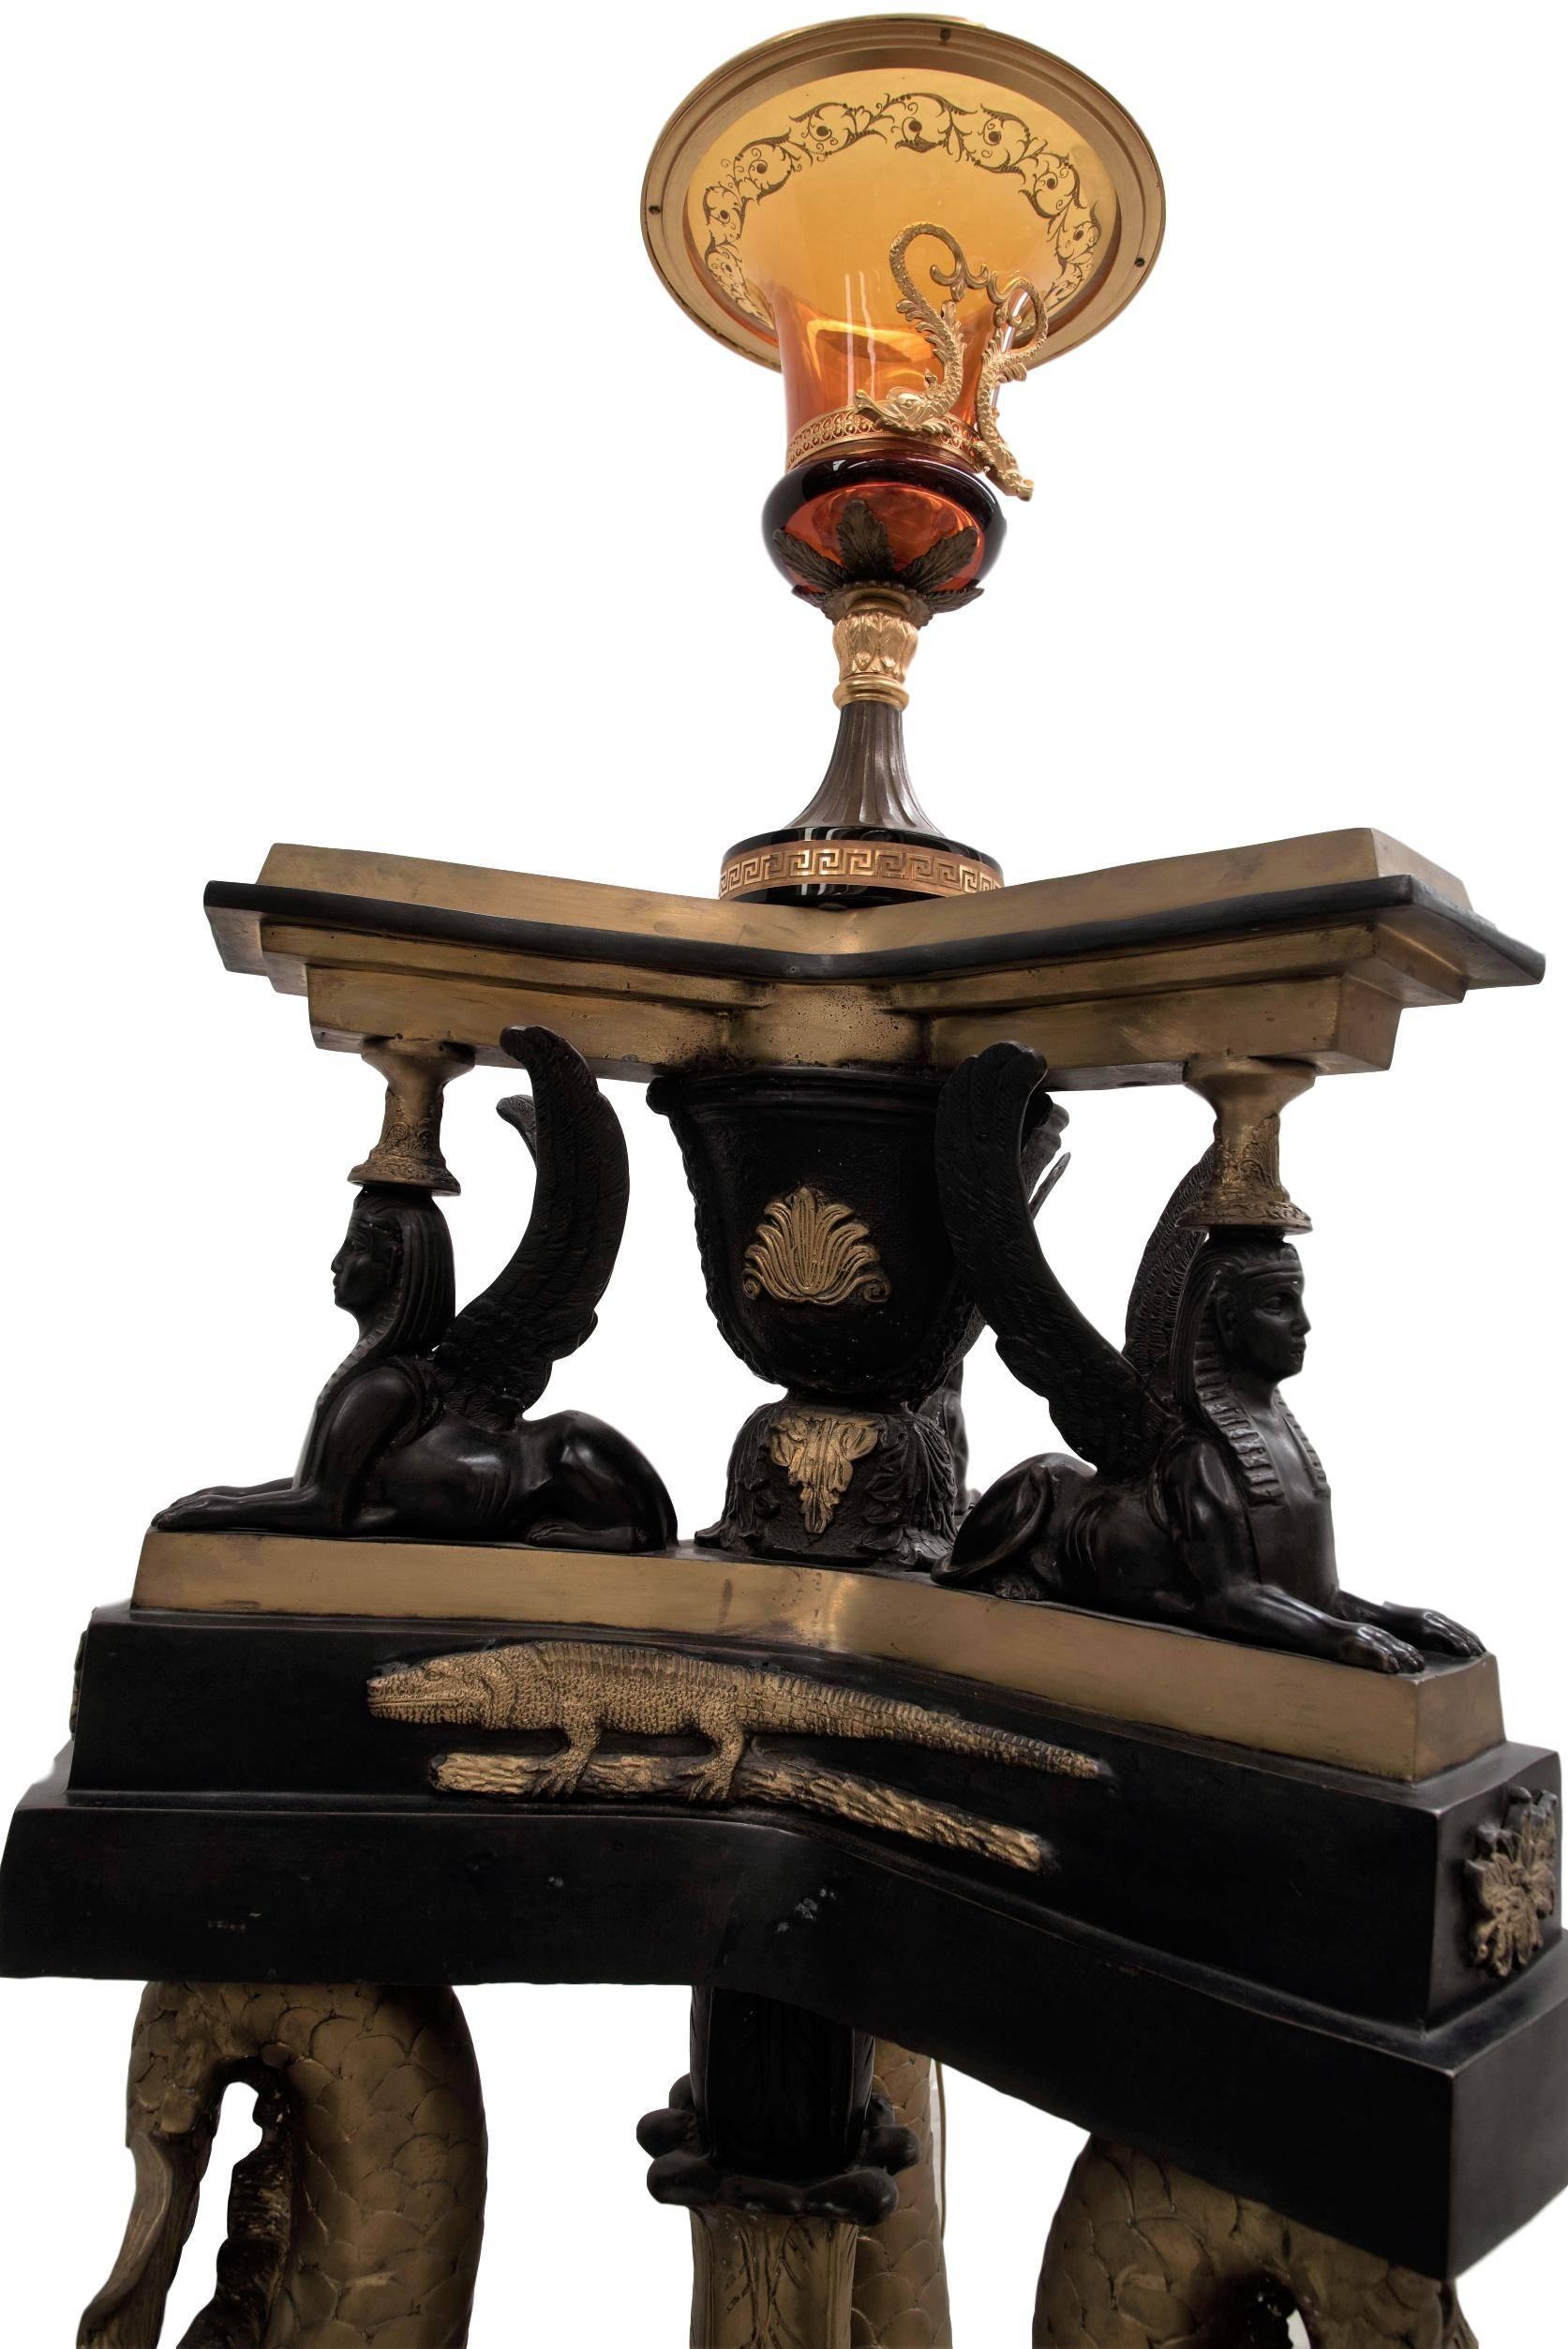 Italian English Regency Lamp, Based on 1810 Dolphin Suite Lord Nelson Tribute Lamp